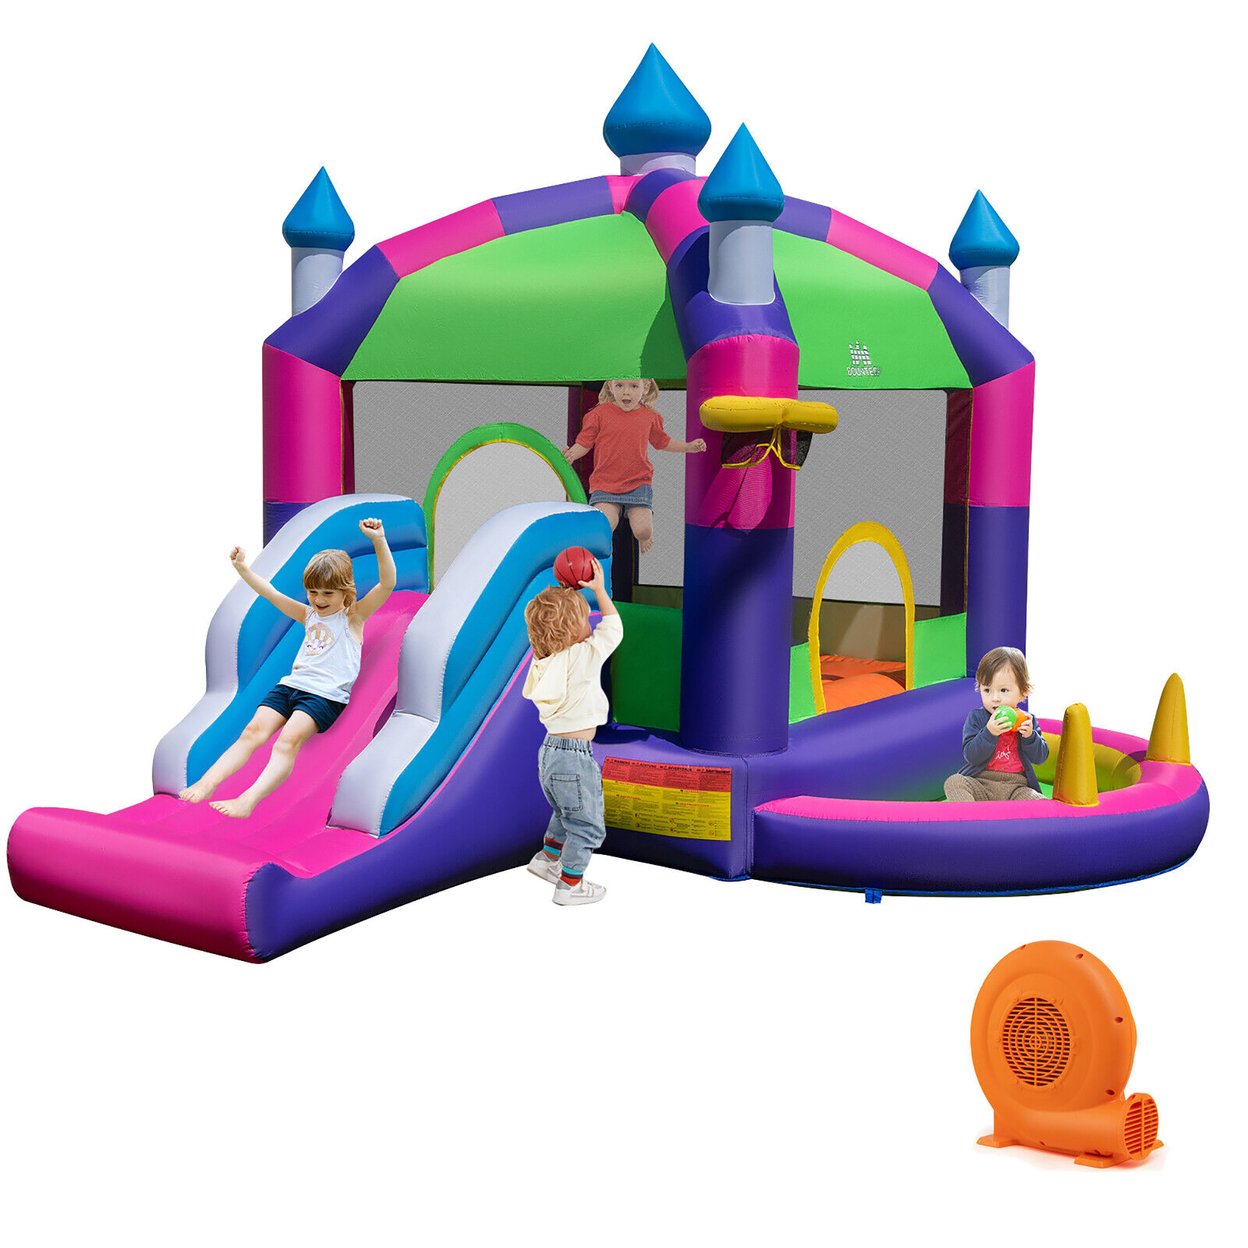 Inflatable Bounce Castle W/ Sun Roof 5-in-1 Jumping Bounce Castle W/ 750W Blower